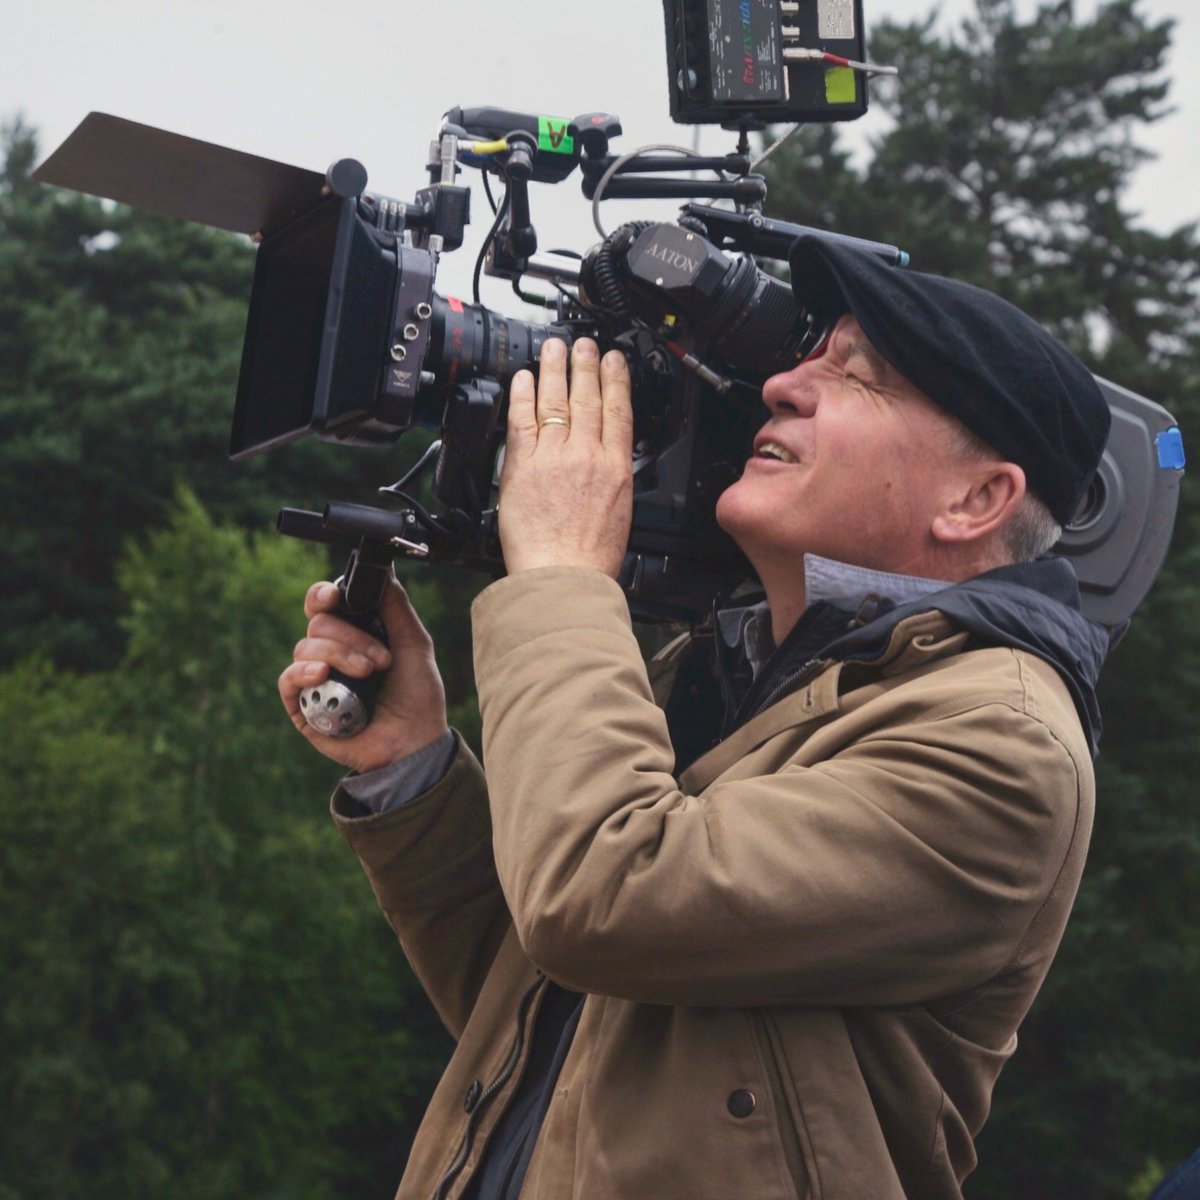 🎥 Read about the illustrious career of #cinematographer and #PierreAngenieuxTribute laureate Barry Ackroyd, BSC – from Ken Loach's mesmerizing dramas to Kathryn Bigelow's gripping thrillers, immerse yourself in his visual artistry: angenieux.com/barry-ackroyd-…